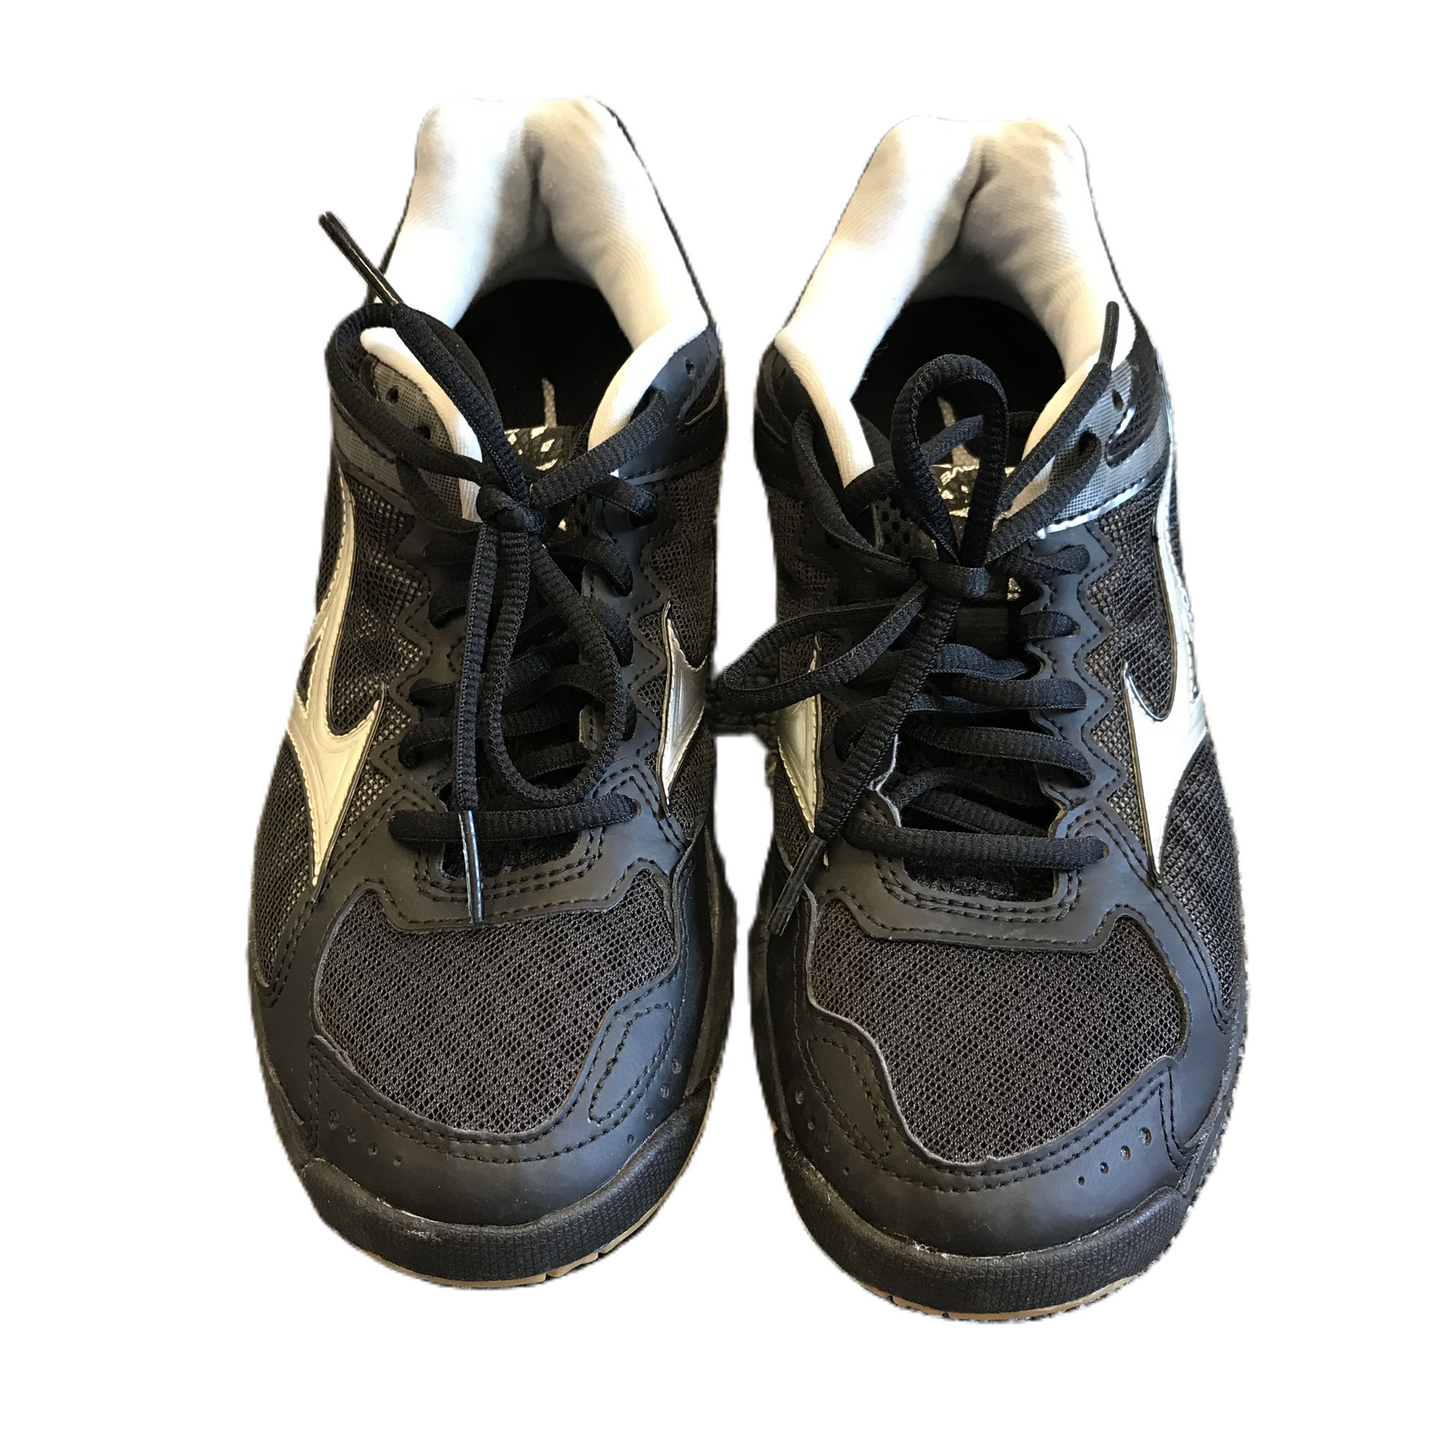 Black Shoes Athletic By Mizuno, Size: 8